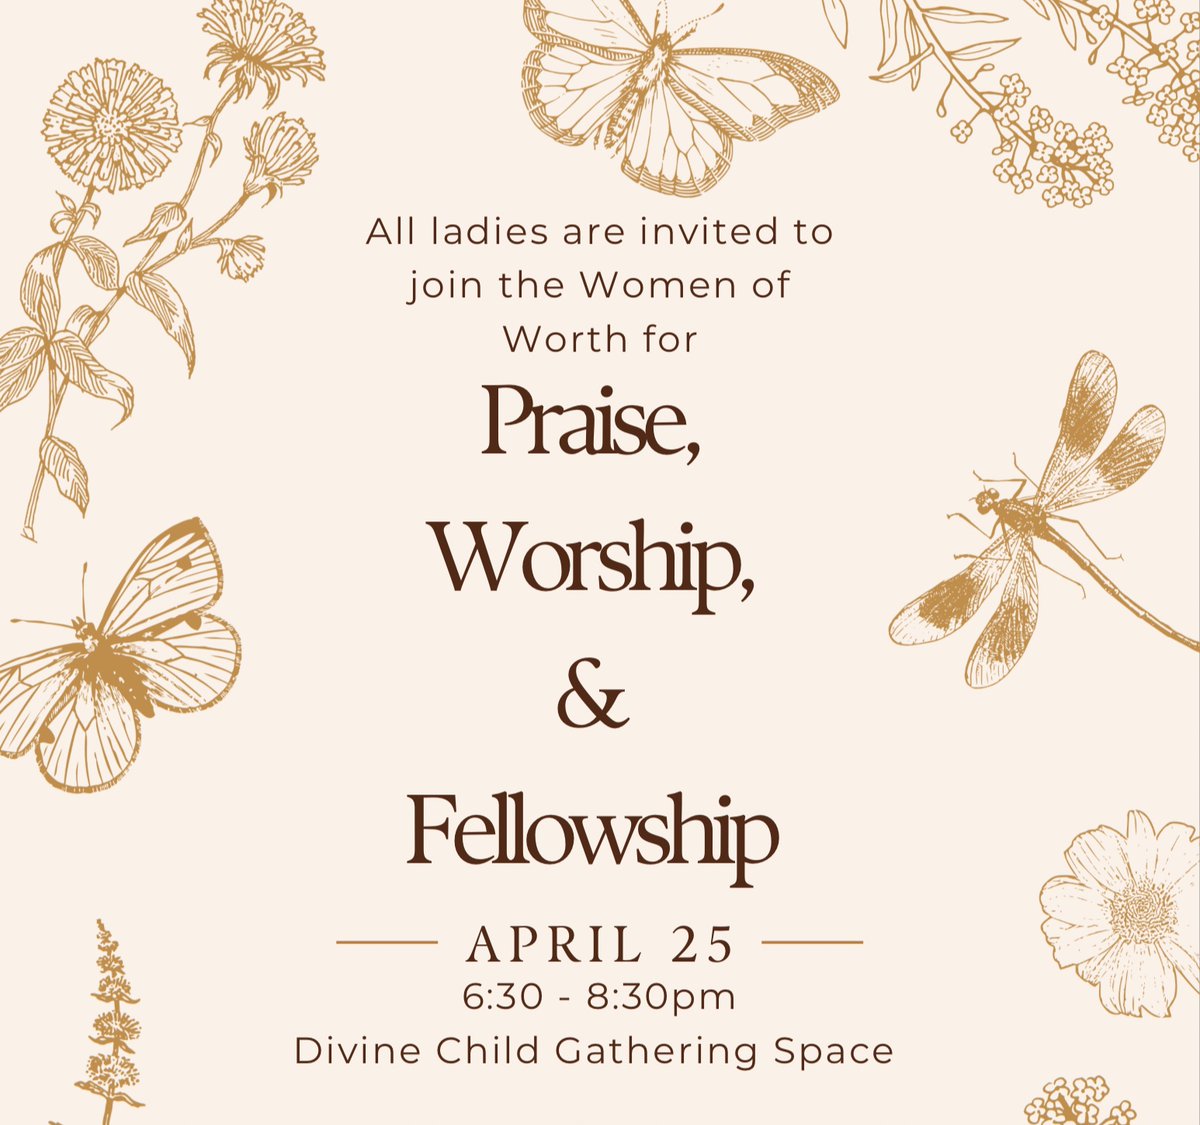 Calling all ladies! 📢 Grab a friend and join us for an uplifting evening of music and fellowship with the Women of Worth on April 25th, from 6:30pm to 8:30pm in the Gathering Space. No sign-up needed — just come as you are and come when you can! See you there!